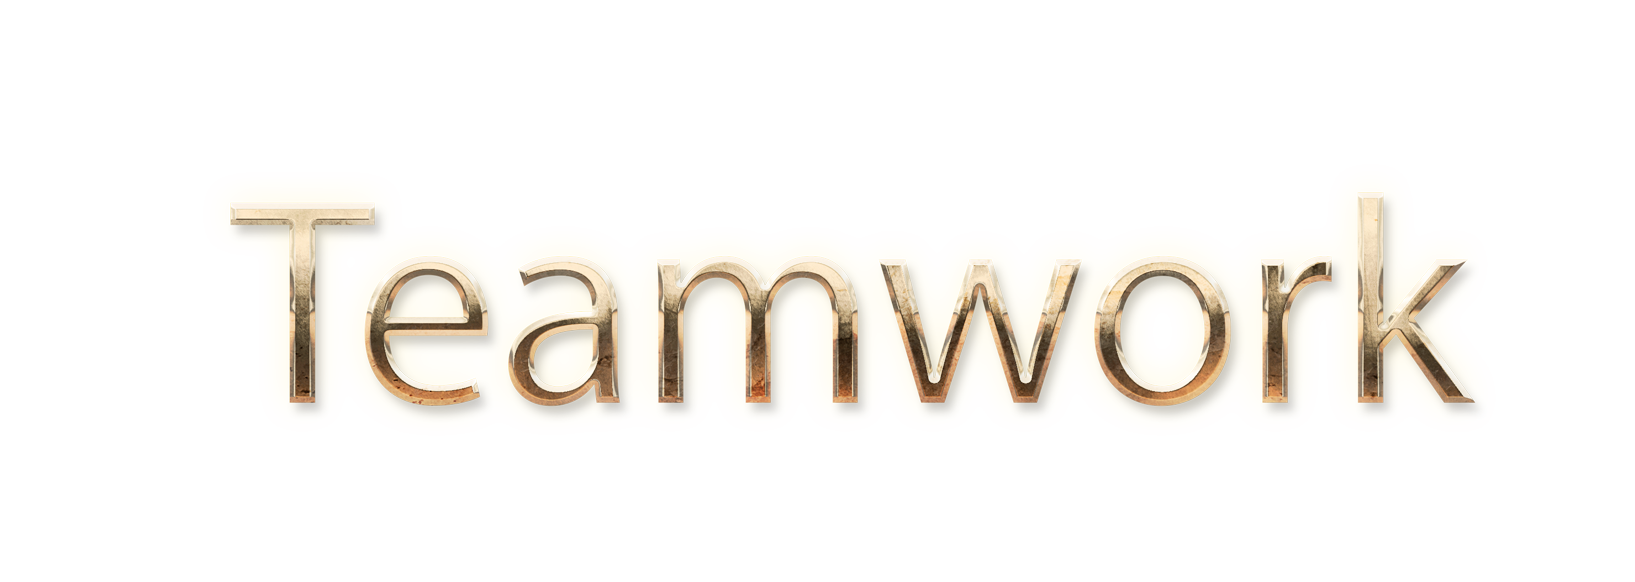 WORD TEAMWORK gold text typography PNG images free